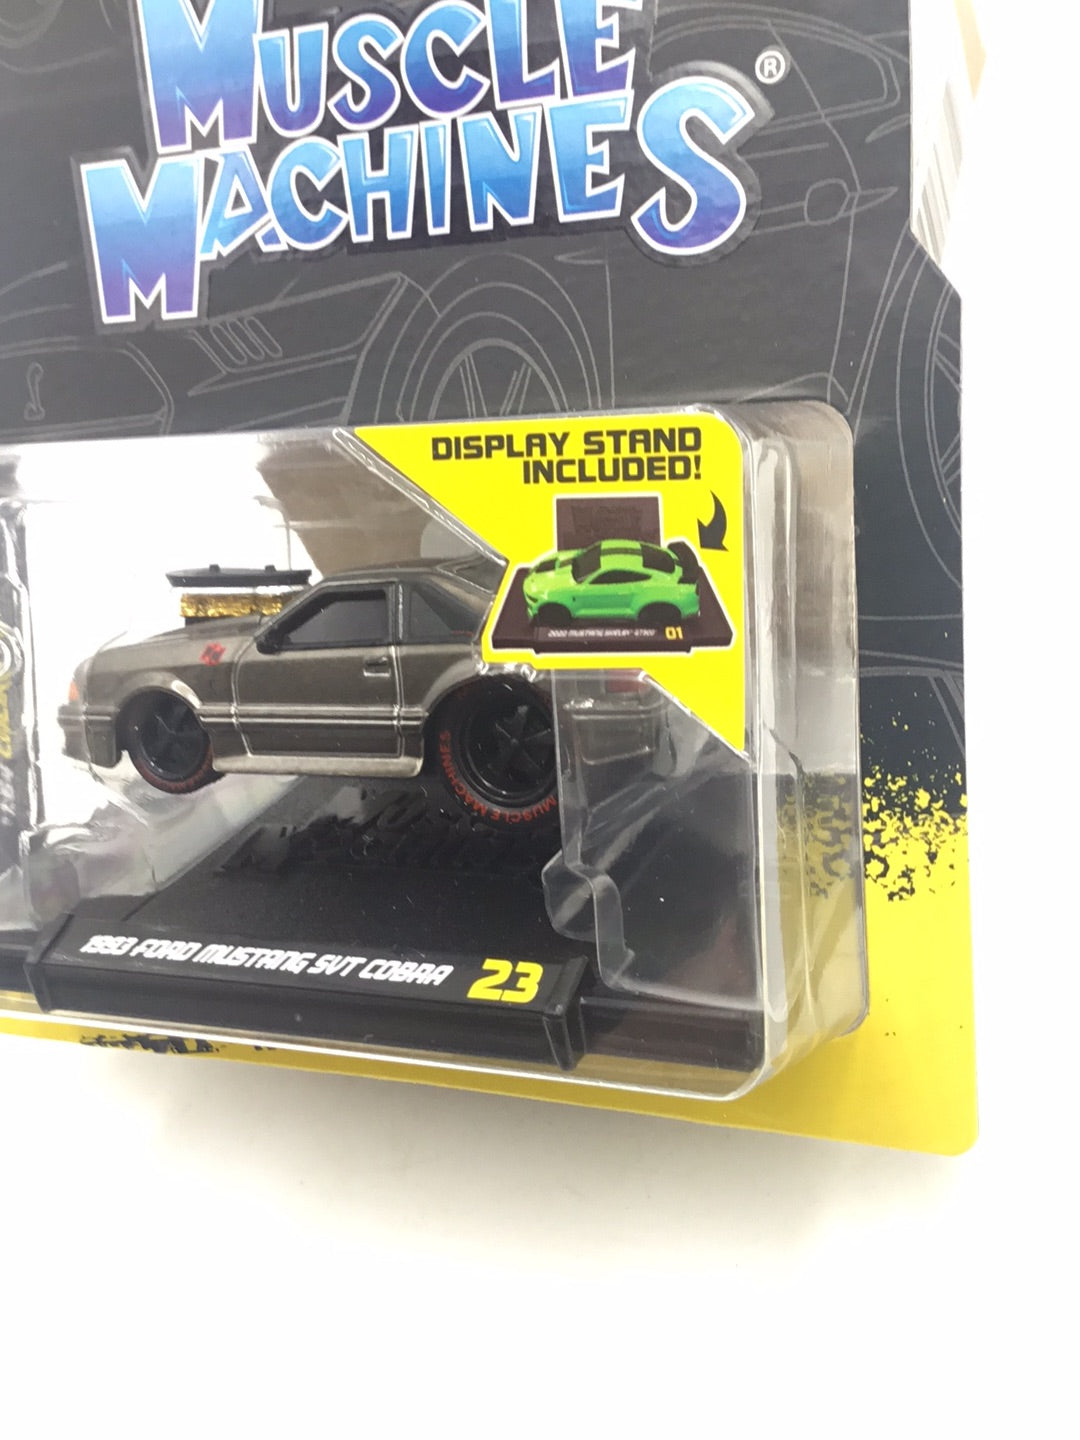 Muscle machines model #23 1993 Ford Mustang SVT Cobra Chase